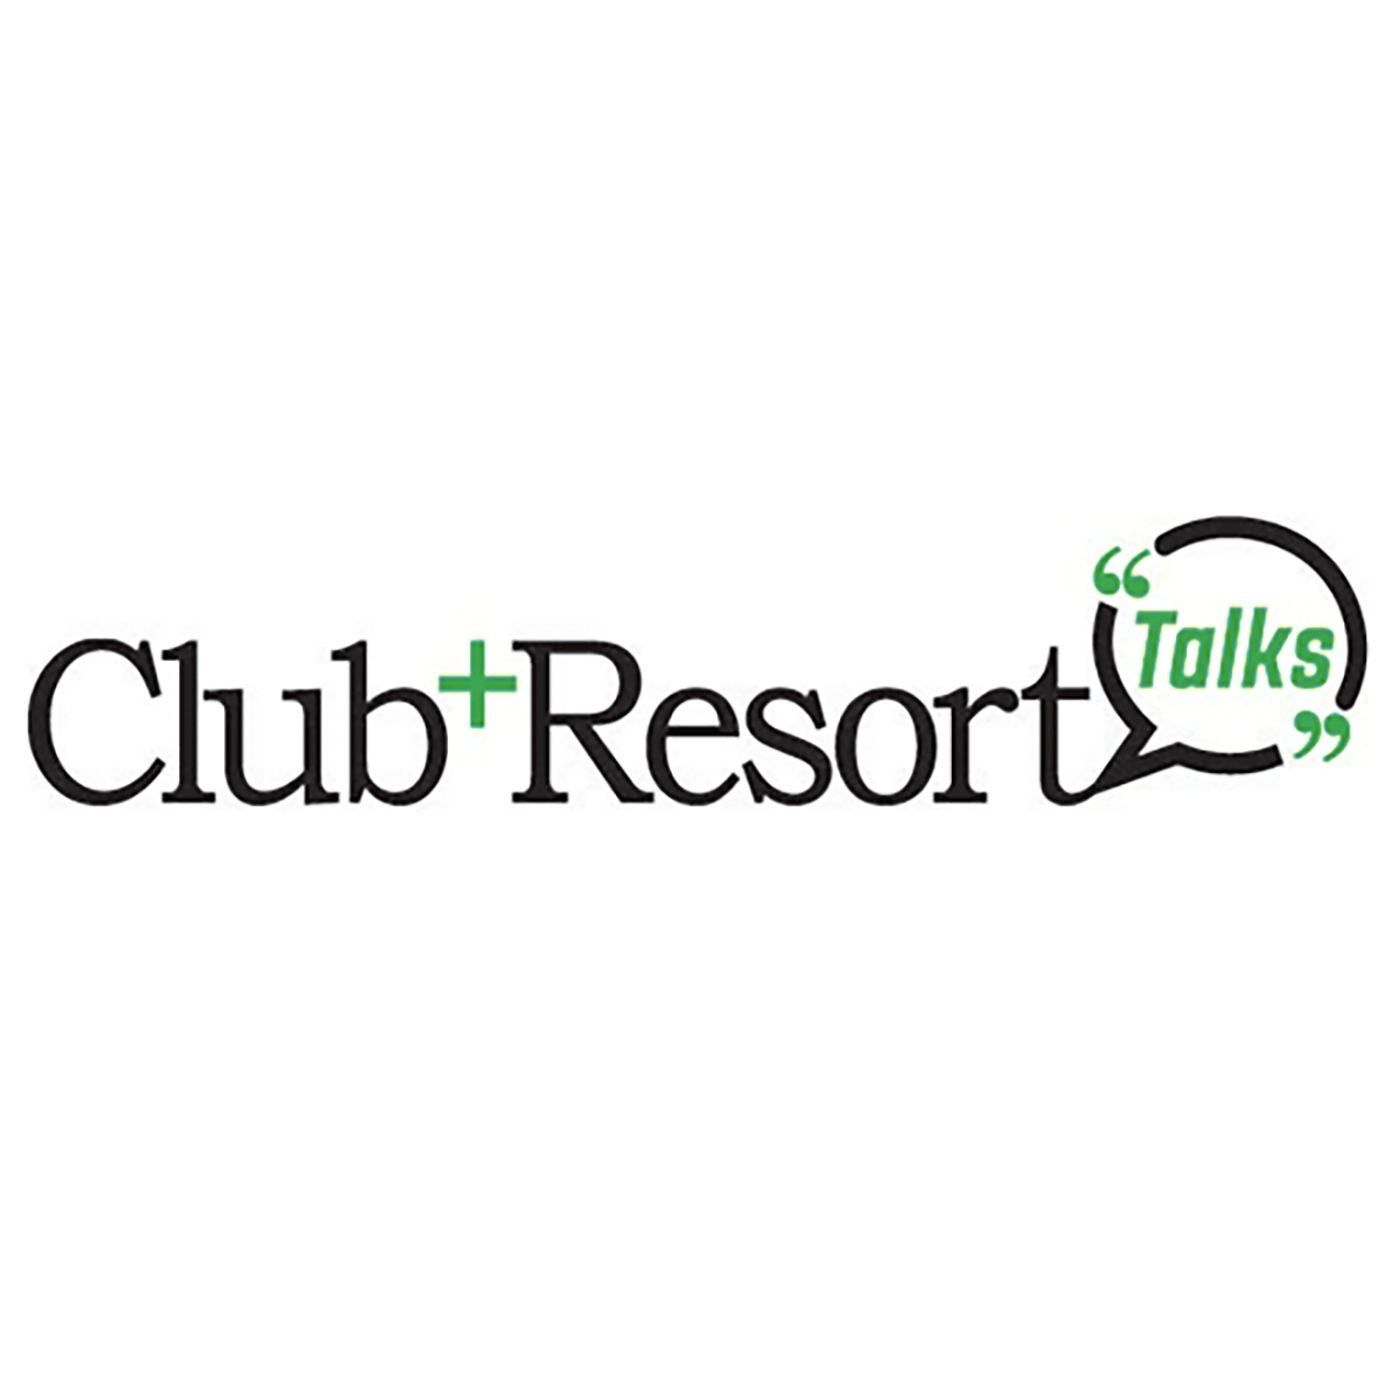 Club + Resort Talks Discusses Sporting Clays With CC Of Buffalo